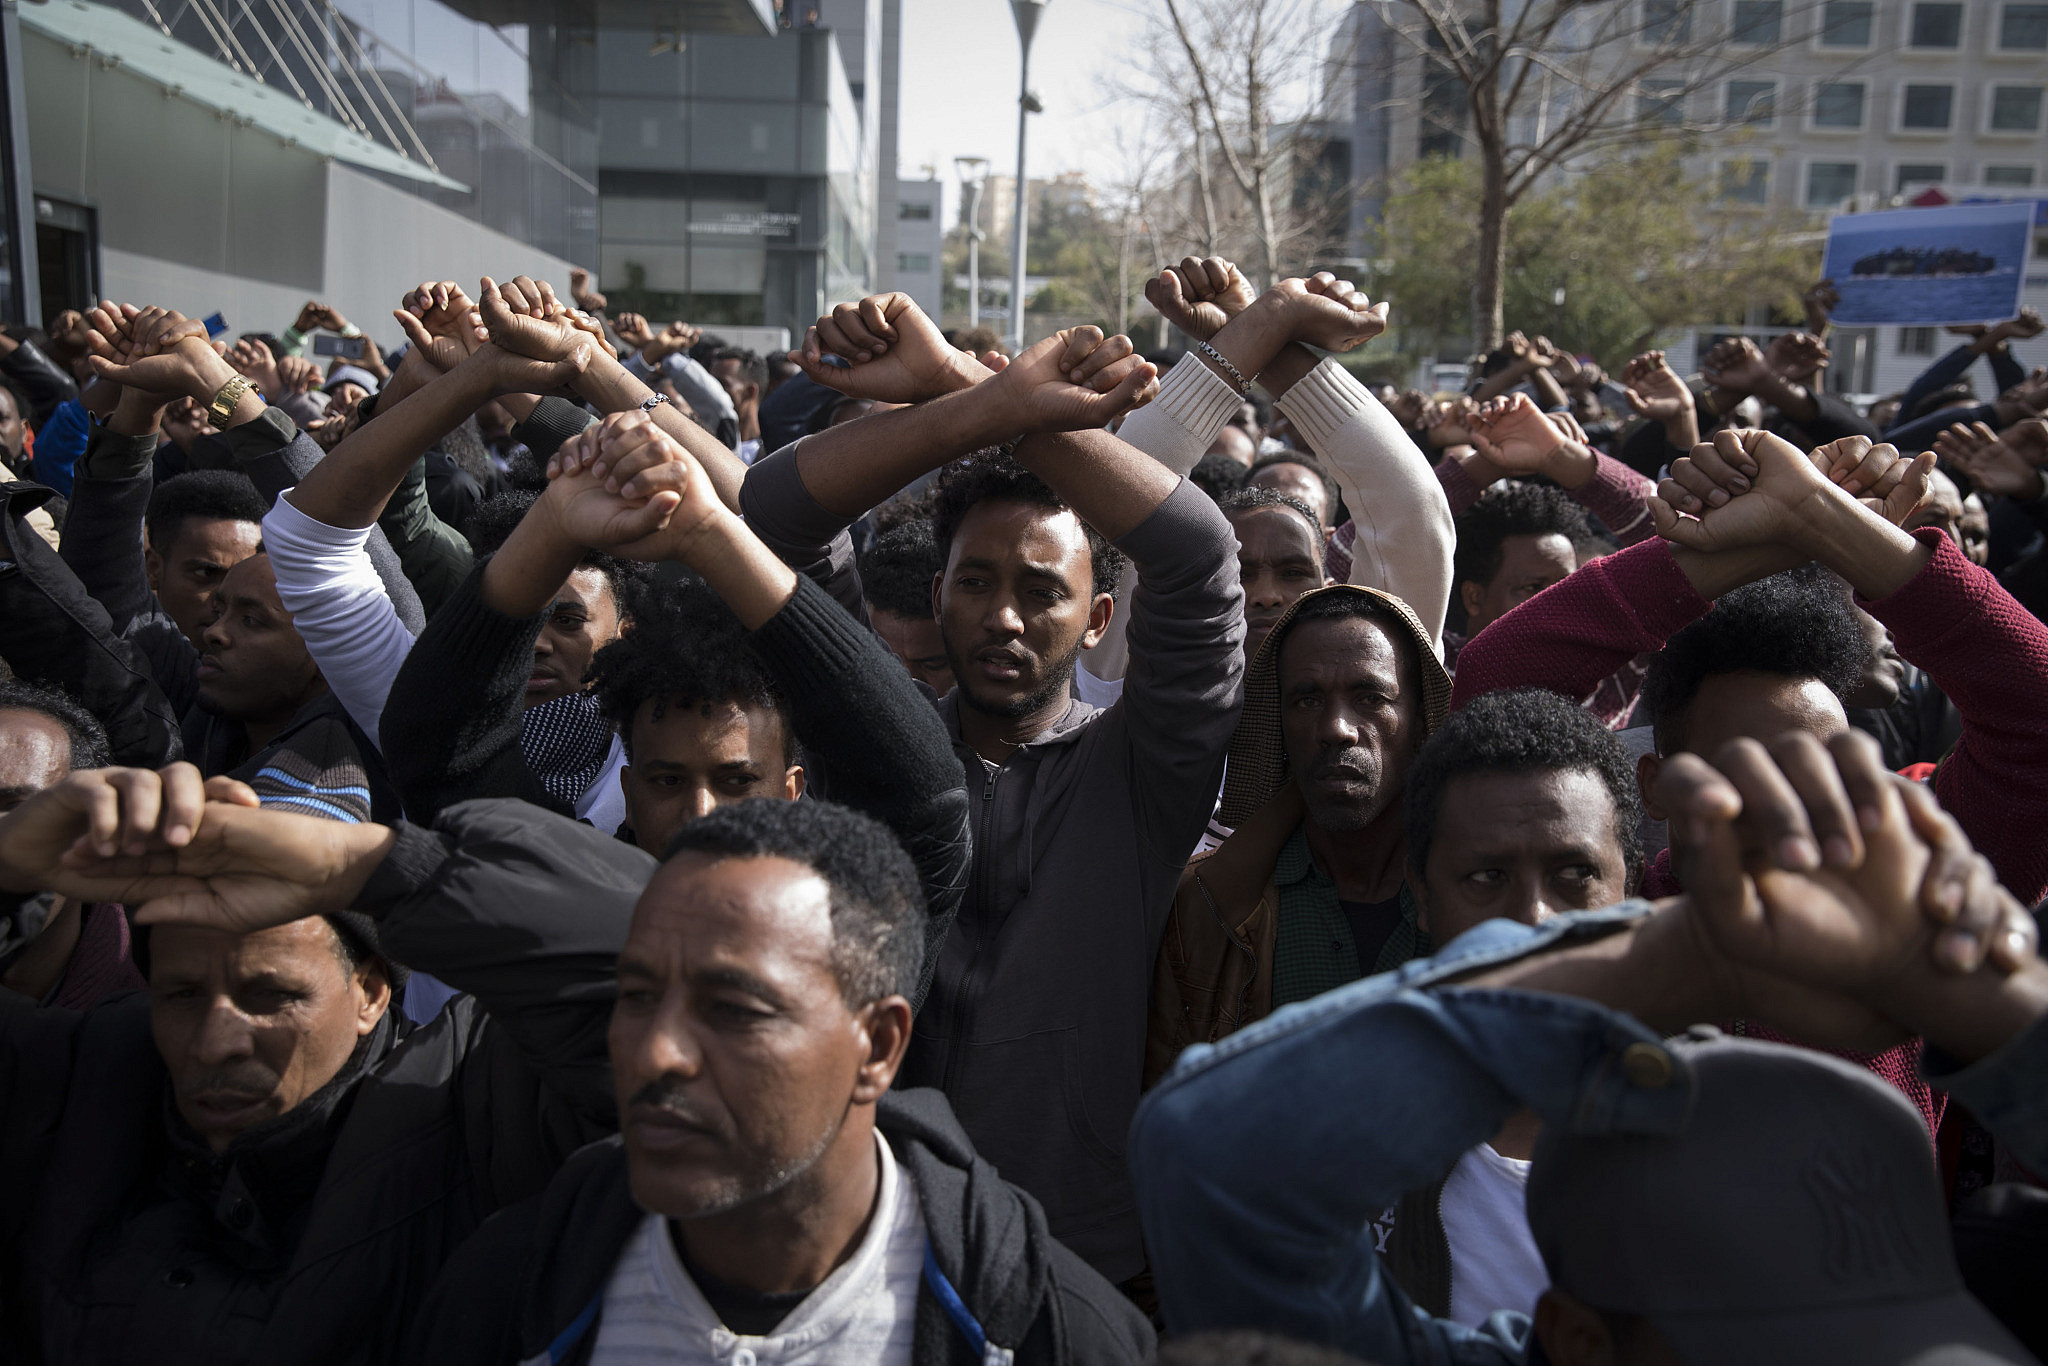 Asylum seekers from Sudan and Eritrea protest outside the embassy of Rwanda in Herzliya, near Tel Aviv, against the Israeli government's plan to deport African asylum seekers to a third-party countries in Africa, January 22, 2018. (Oren Ziv/Activestills)